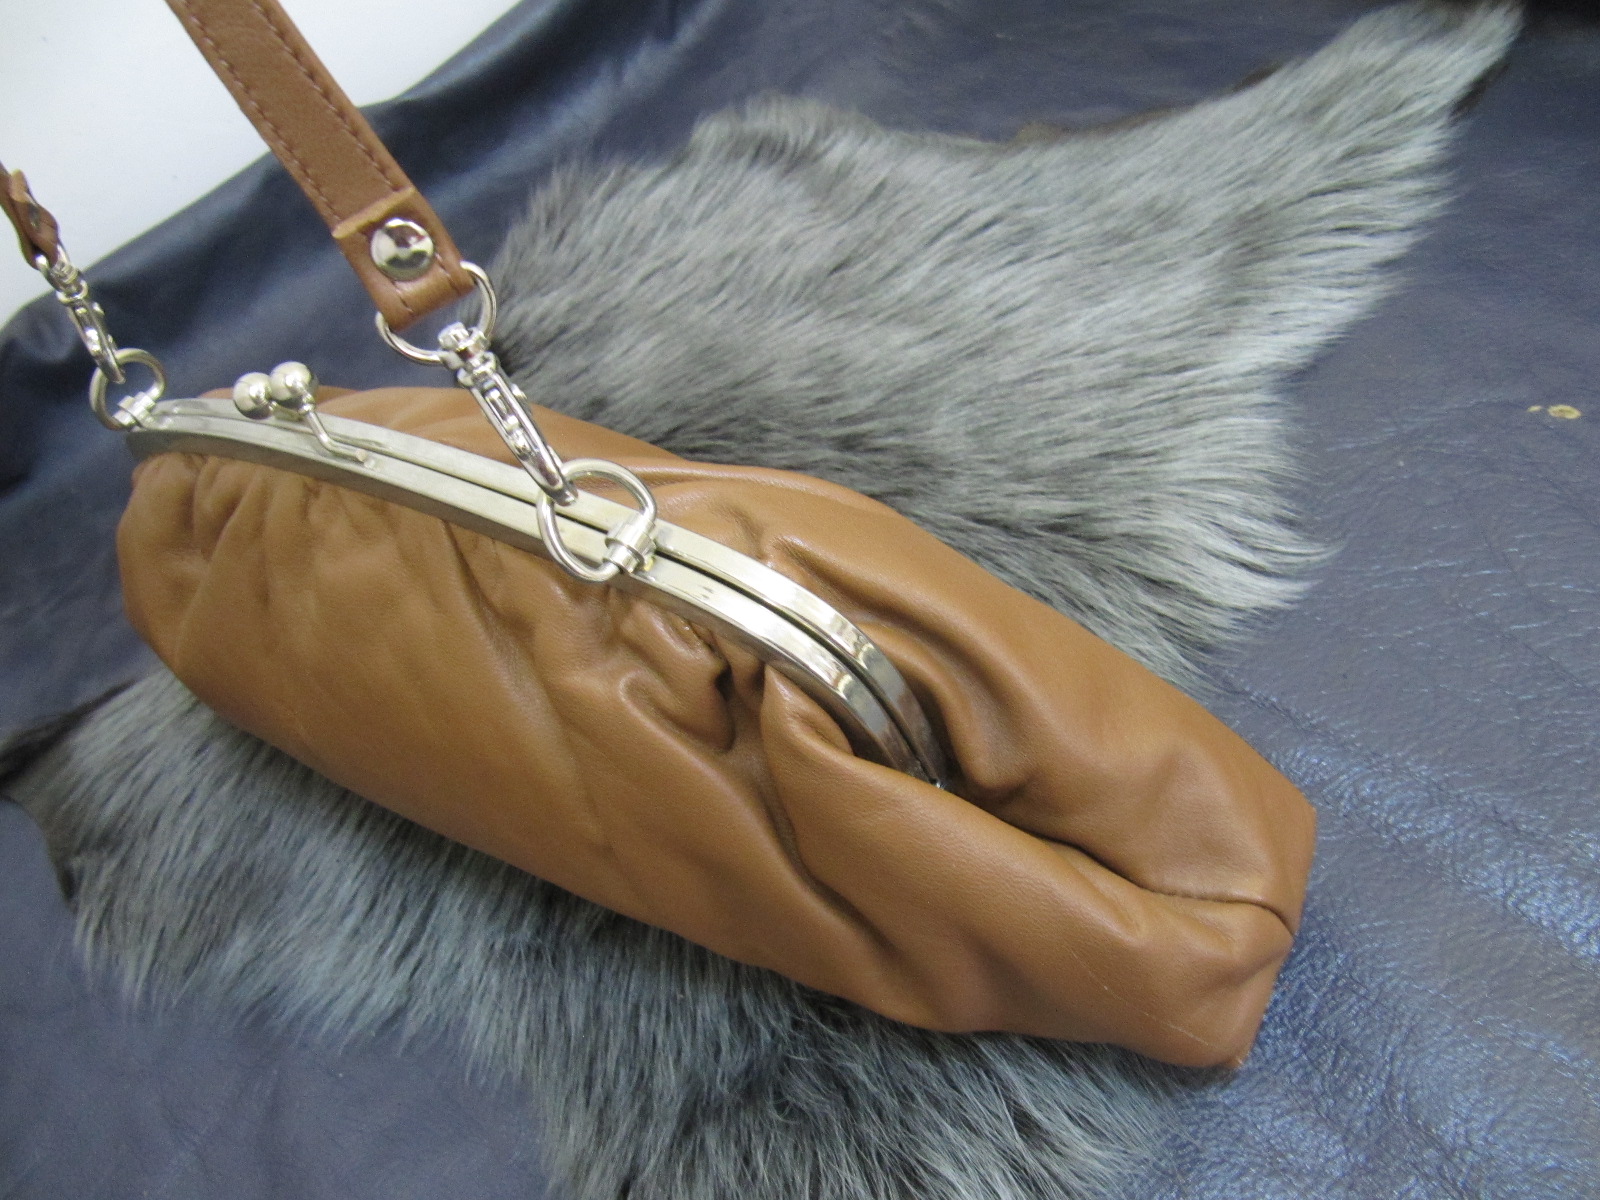 Tan leather & silver clasp top bag